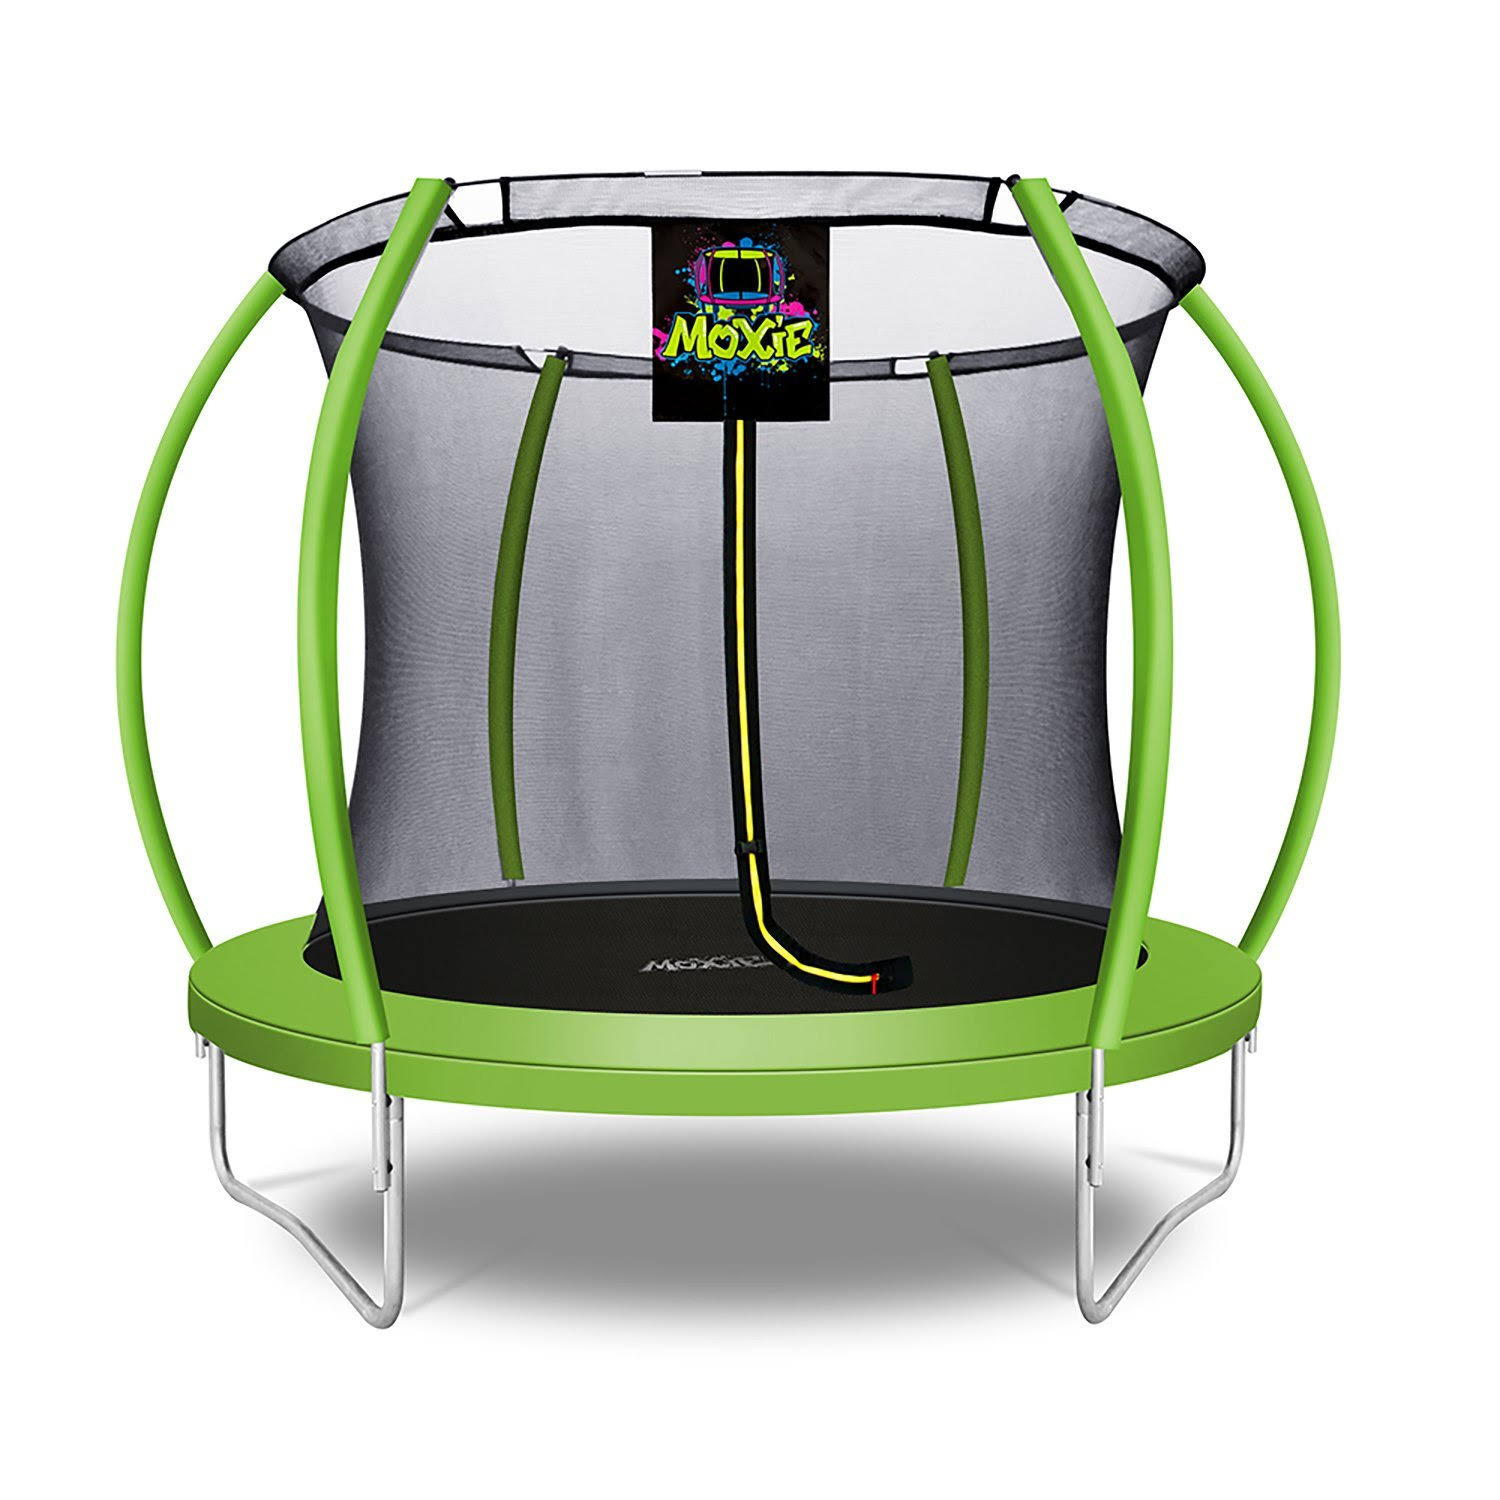 Moxie Pumpkin-Shaped Outdoor Trampoline Set with Premium Top-Ring Frame Safety Enclosure, 8 FT